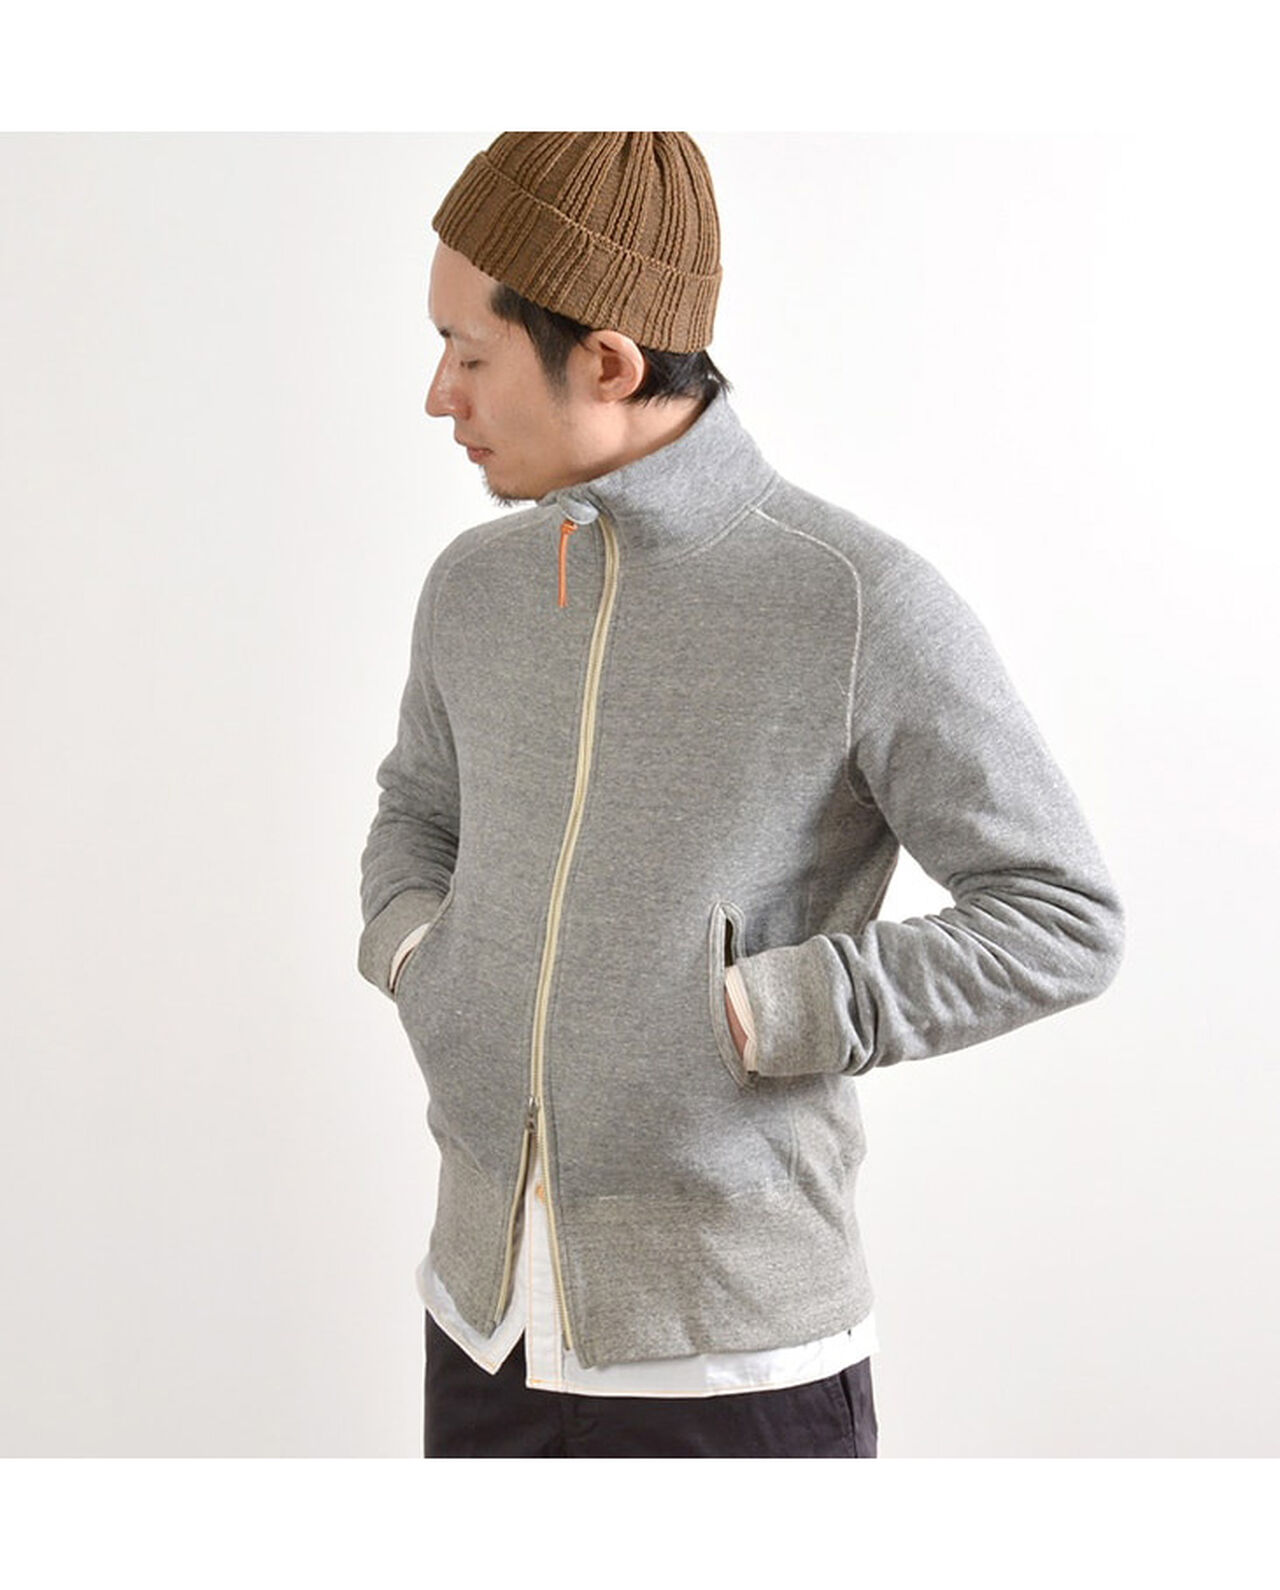 Classic sweatshirt stand-up collar blouson,, large image number 5